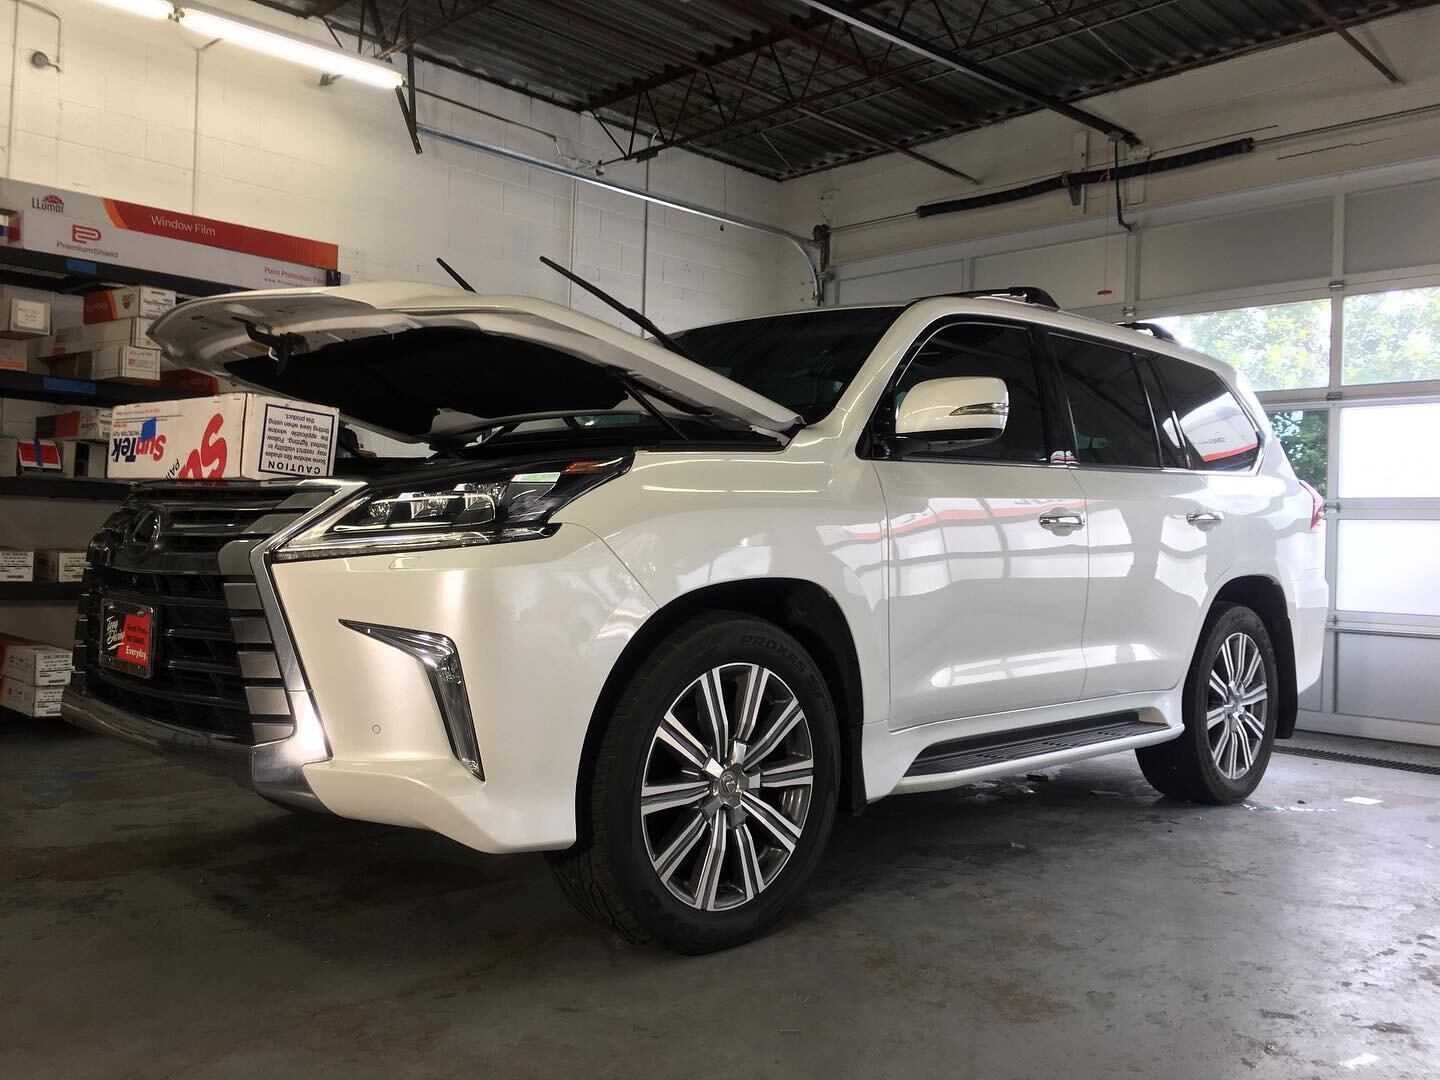 That&rsquo;s a wrap for week one in the new location. Finished off with a few ceramic windshields a standard clear bra and some more progress on the Lexus LX570 ppf wrap. Great day and great week. Stay tuned! We have a huge week coming up!!